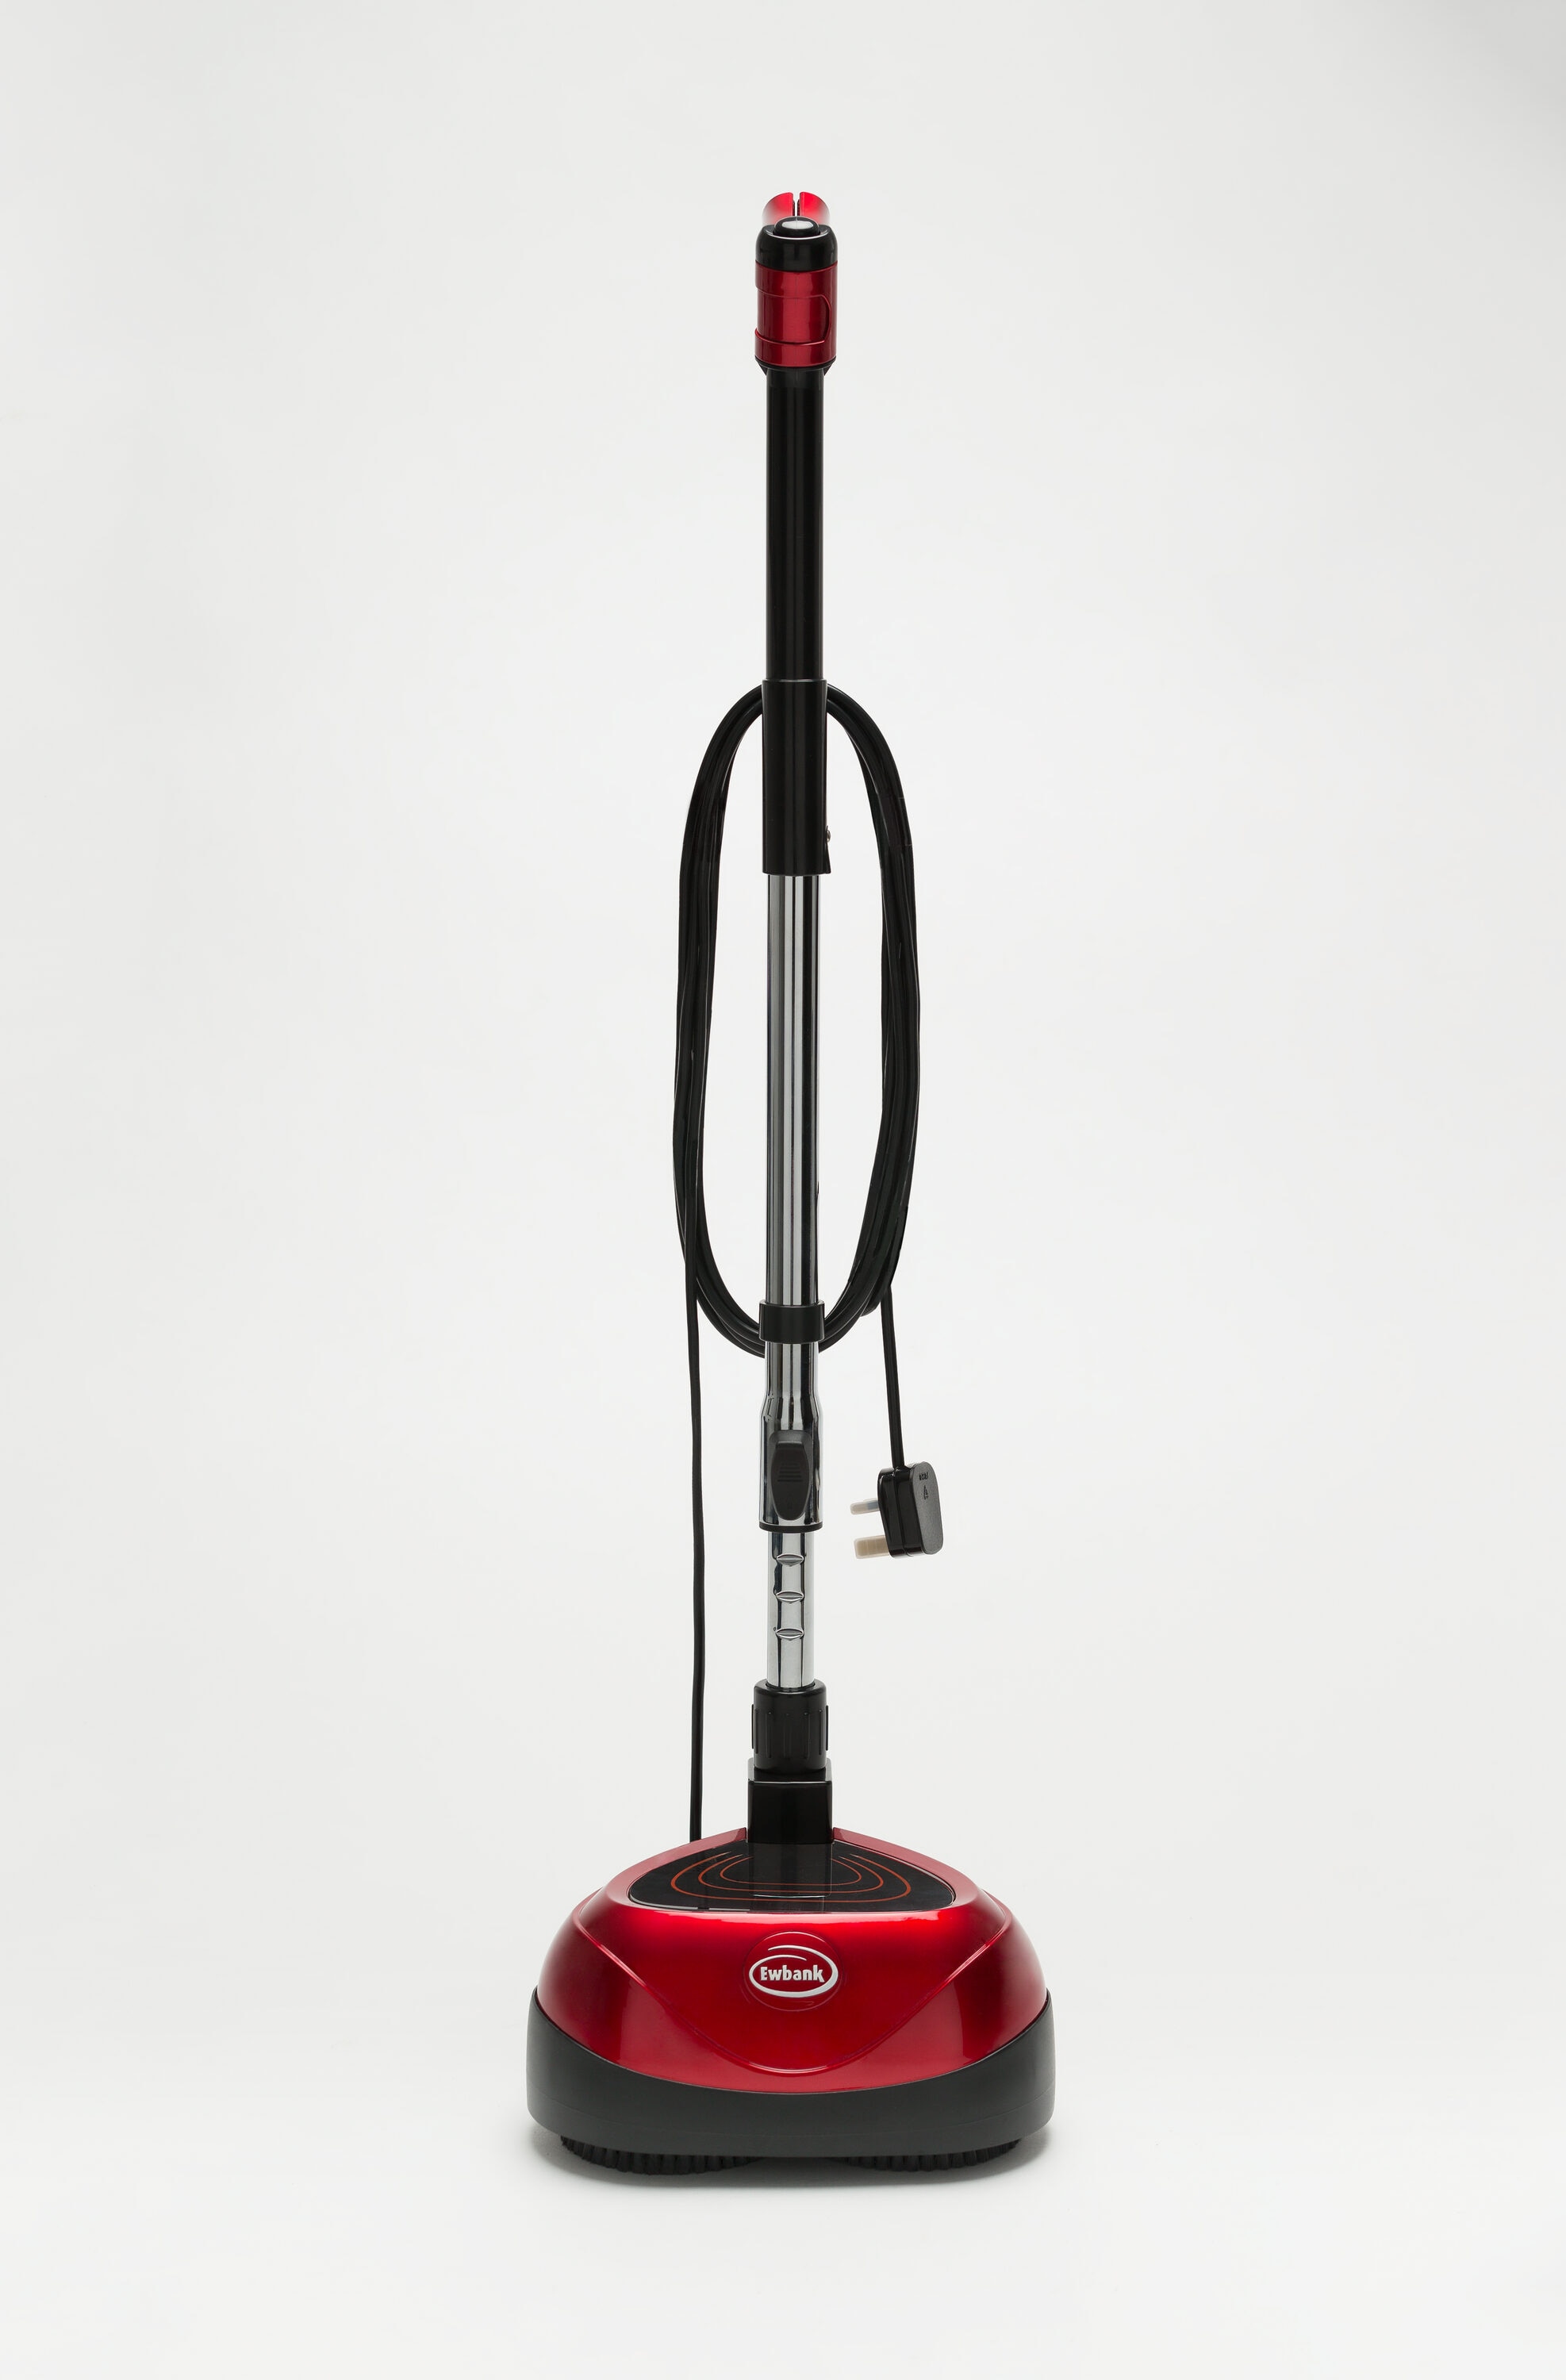 The Hard Floor Scrubber With Spray Applicator